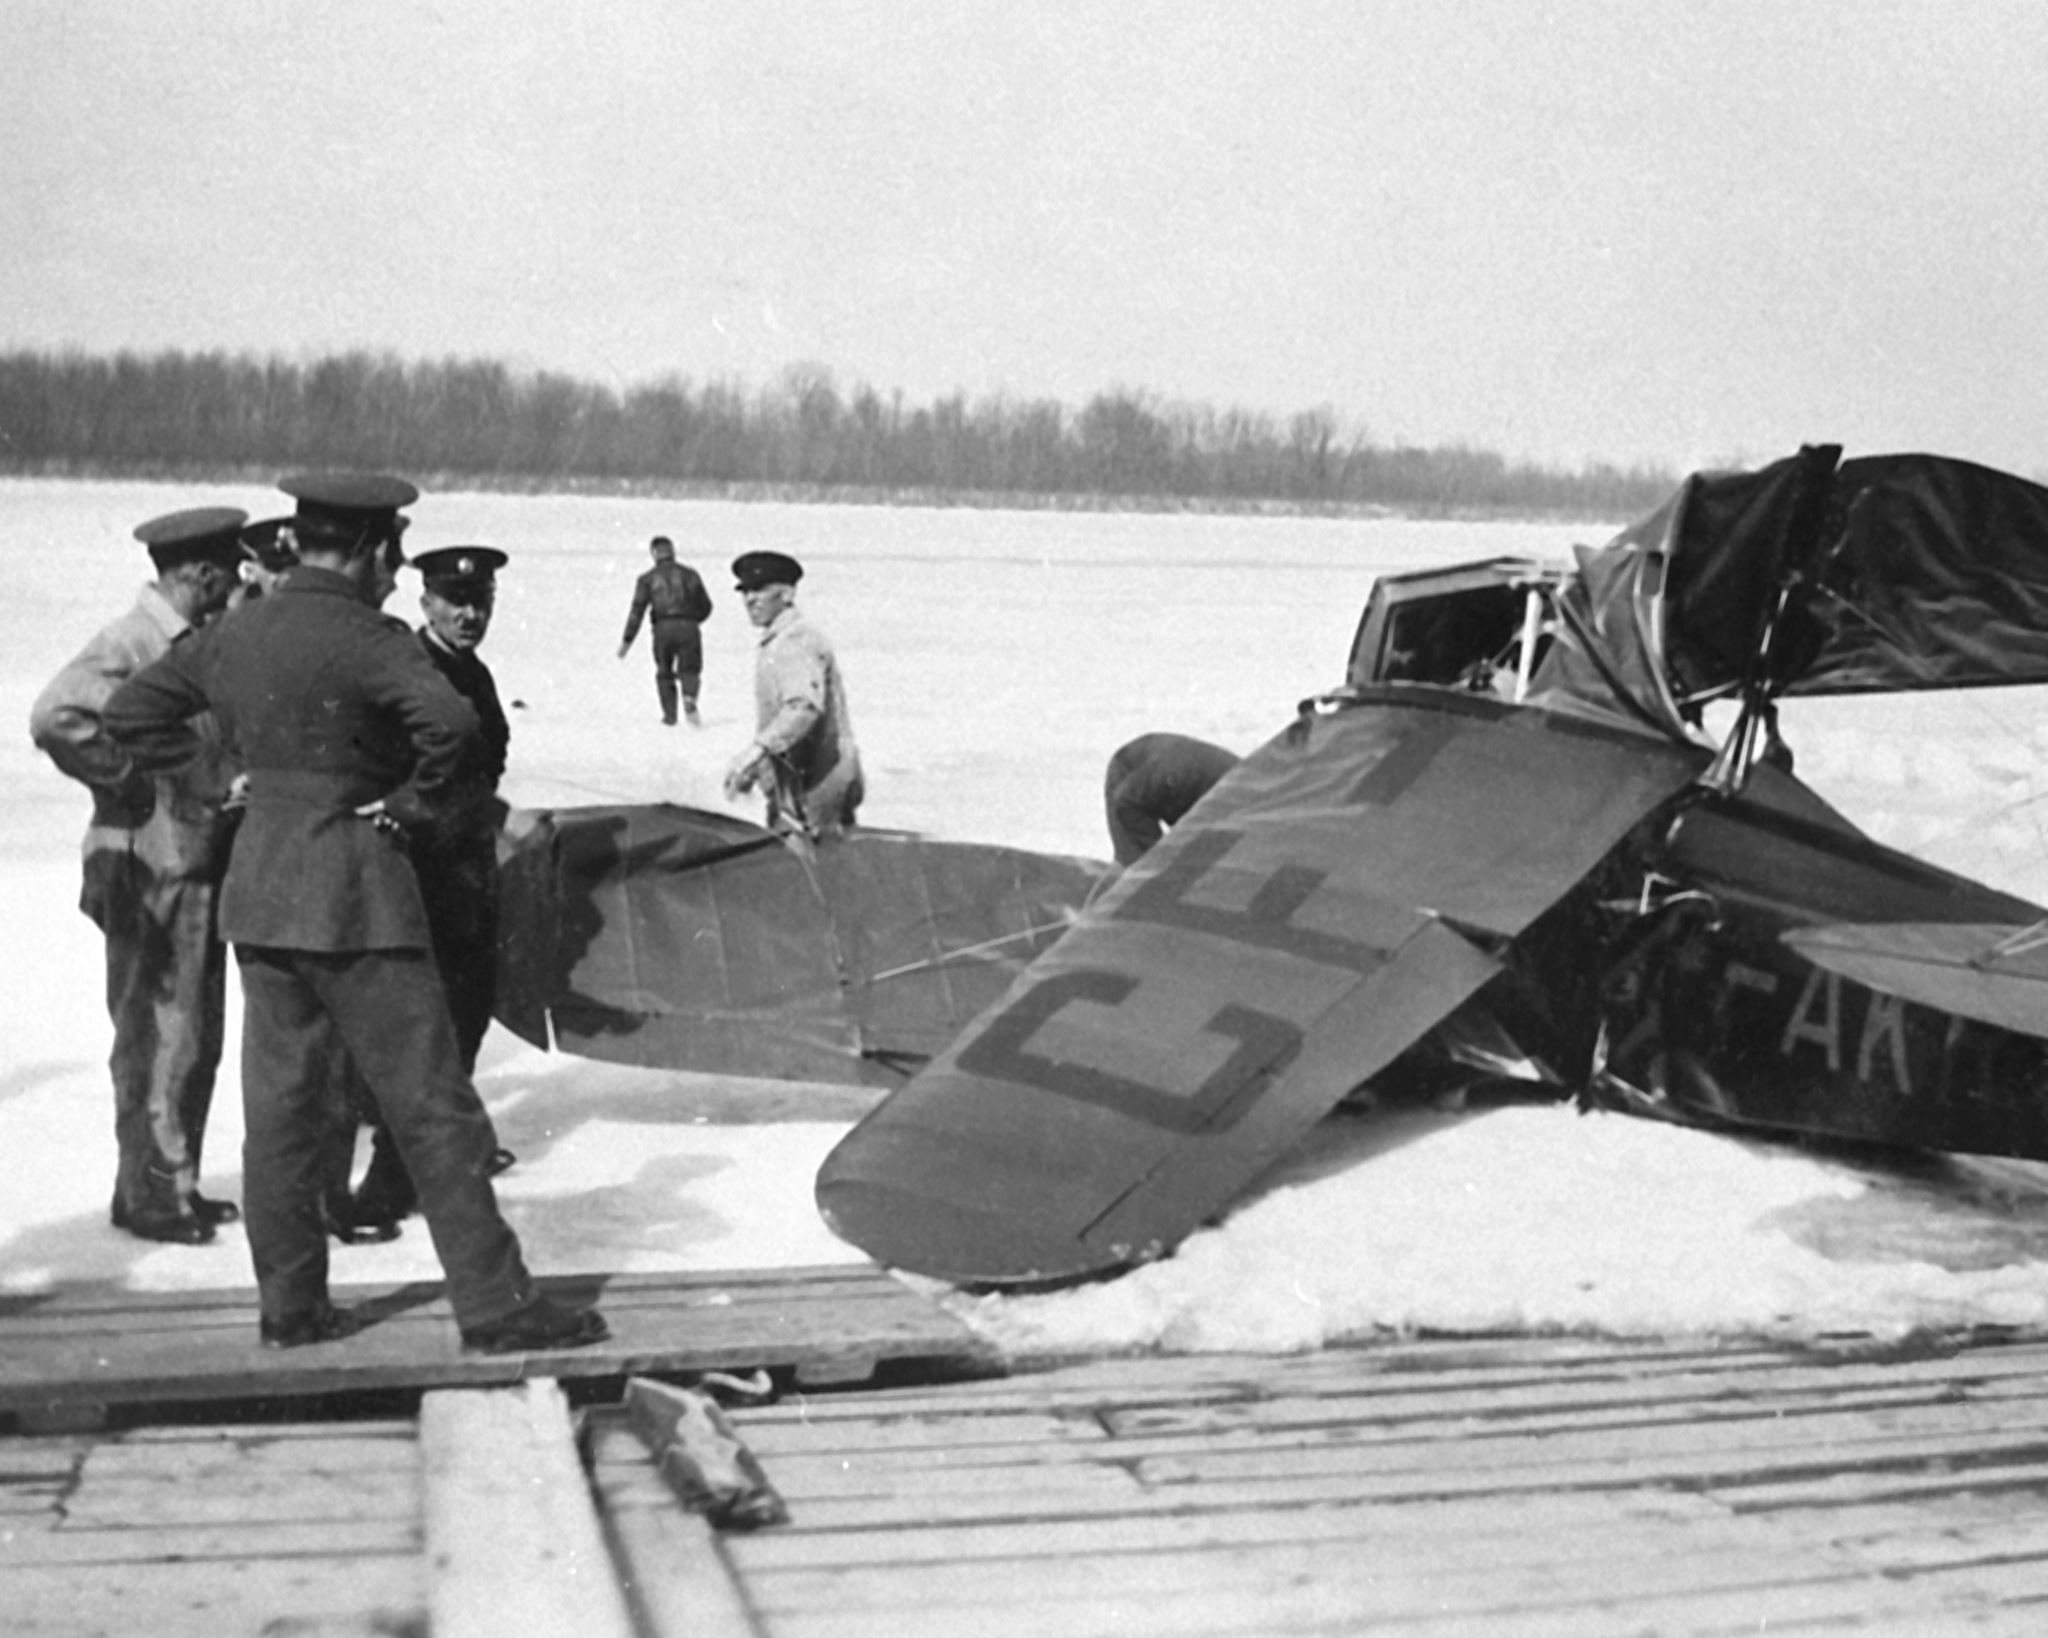 The wreckage of Fairchild KR-21, CF-AKR, on the ice of the Ottawa River on March 12, 1930. Wing Commander (retired) William Barker died in the crash. PHOTO: DND Archives, RE74-166